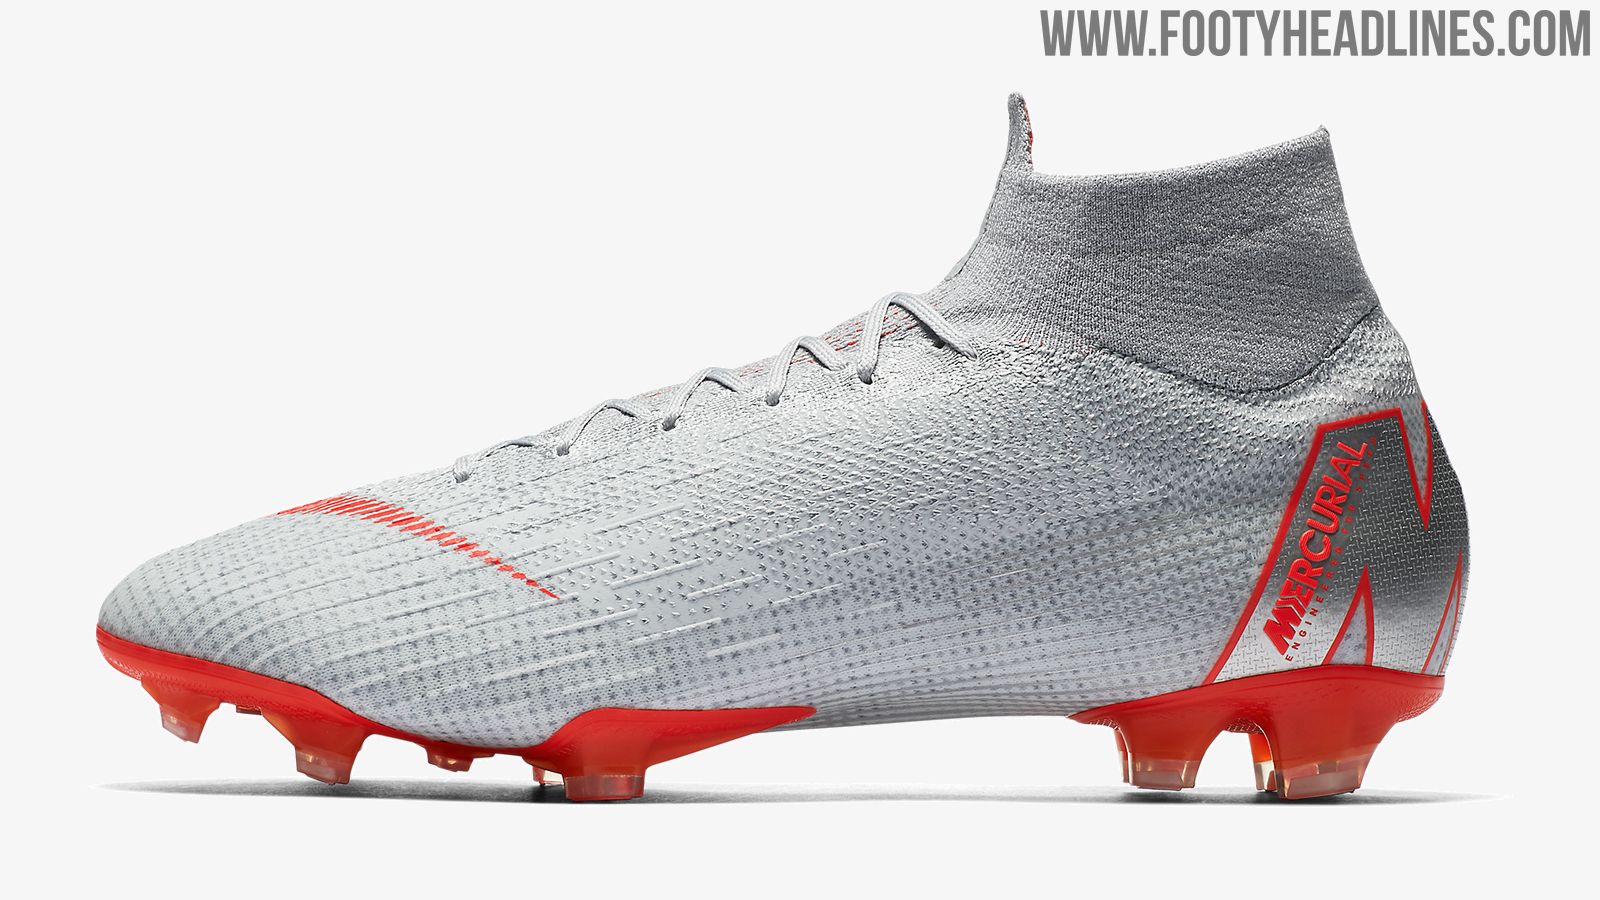 Silver Nike Mercurial Superfly 360 'Raised Concrete' 2018-2019 Boots Released Footy Headlines